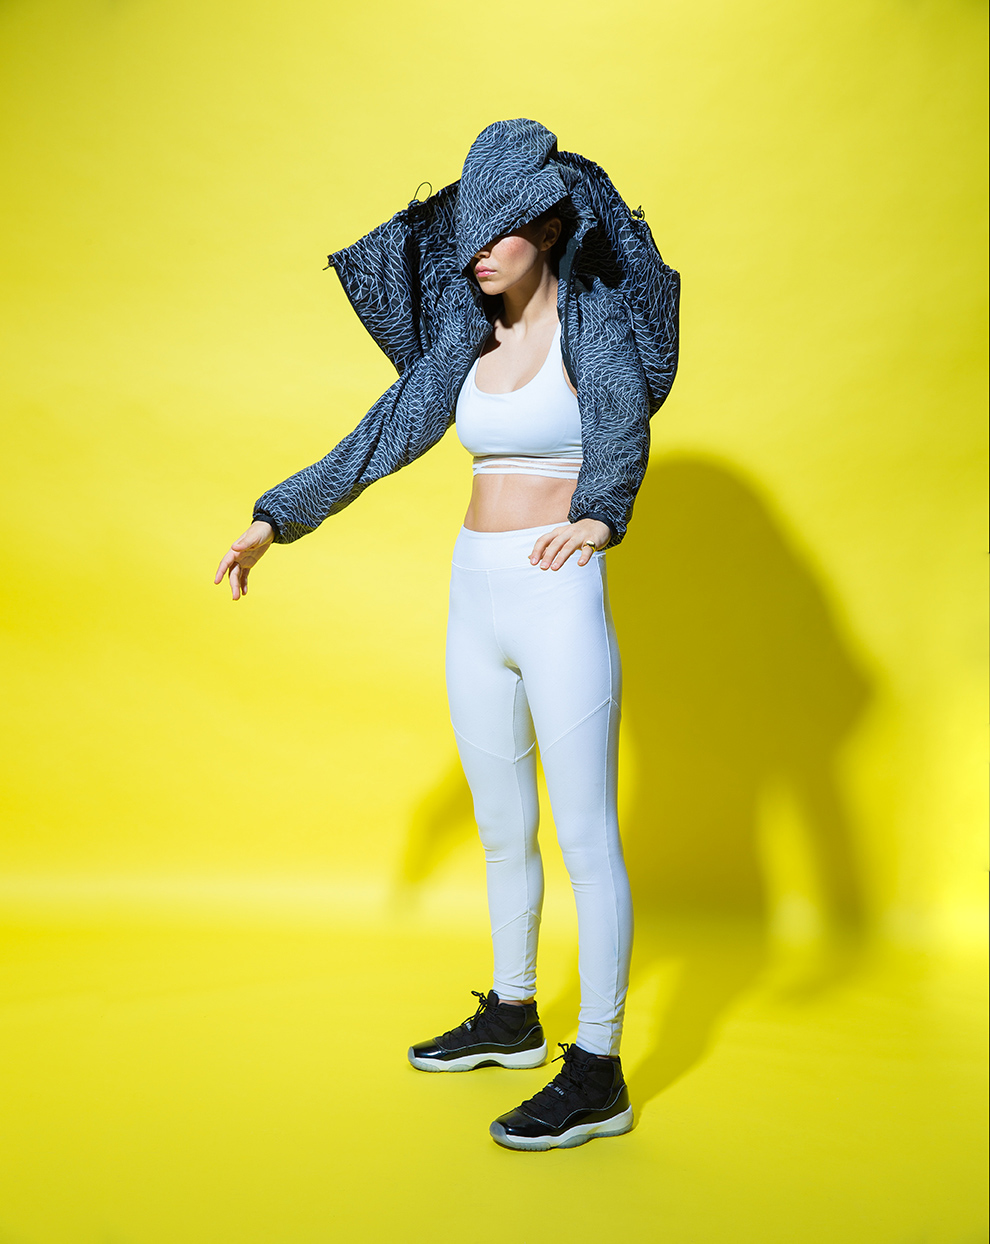 Portland Commercial Photography - athlete in Nike gear  hidden by jacket hood on a yellow background